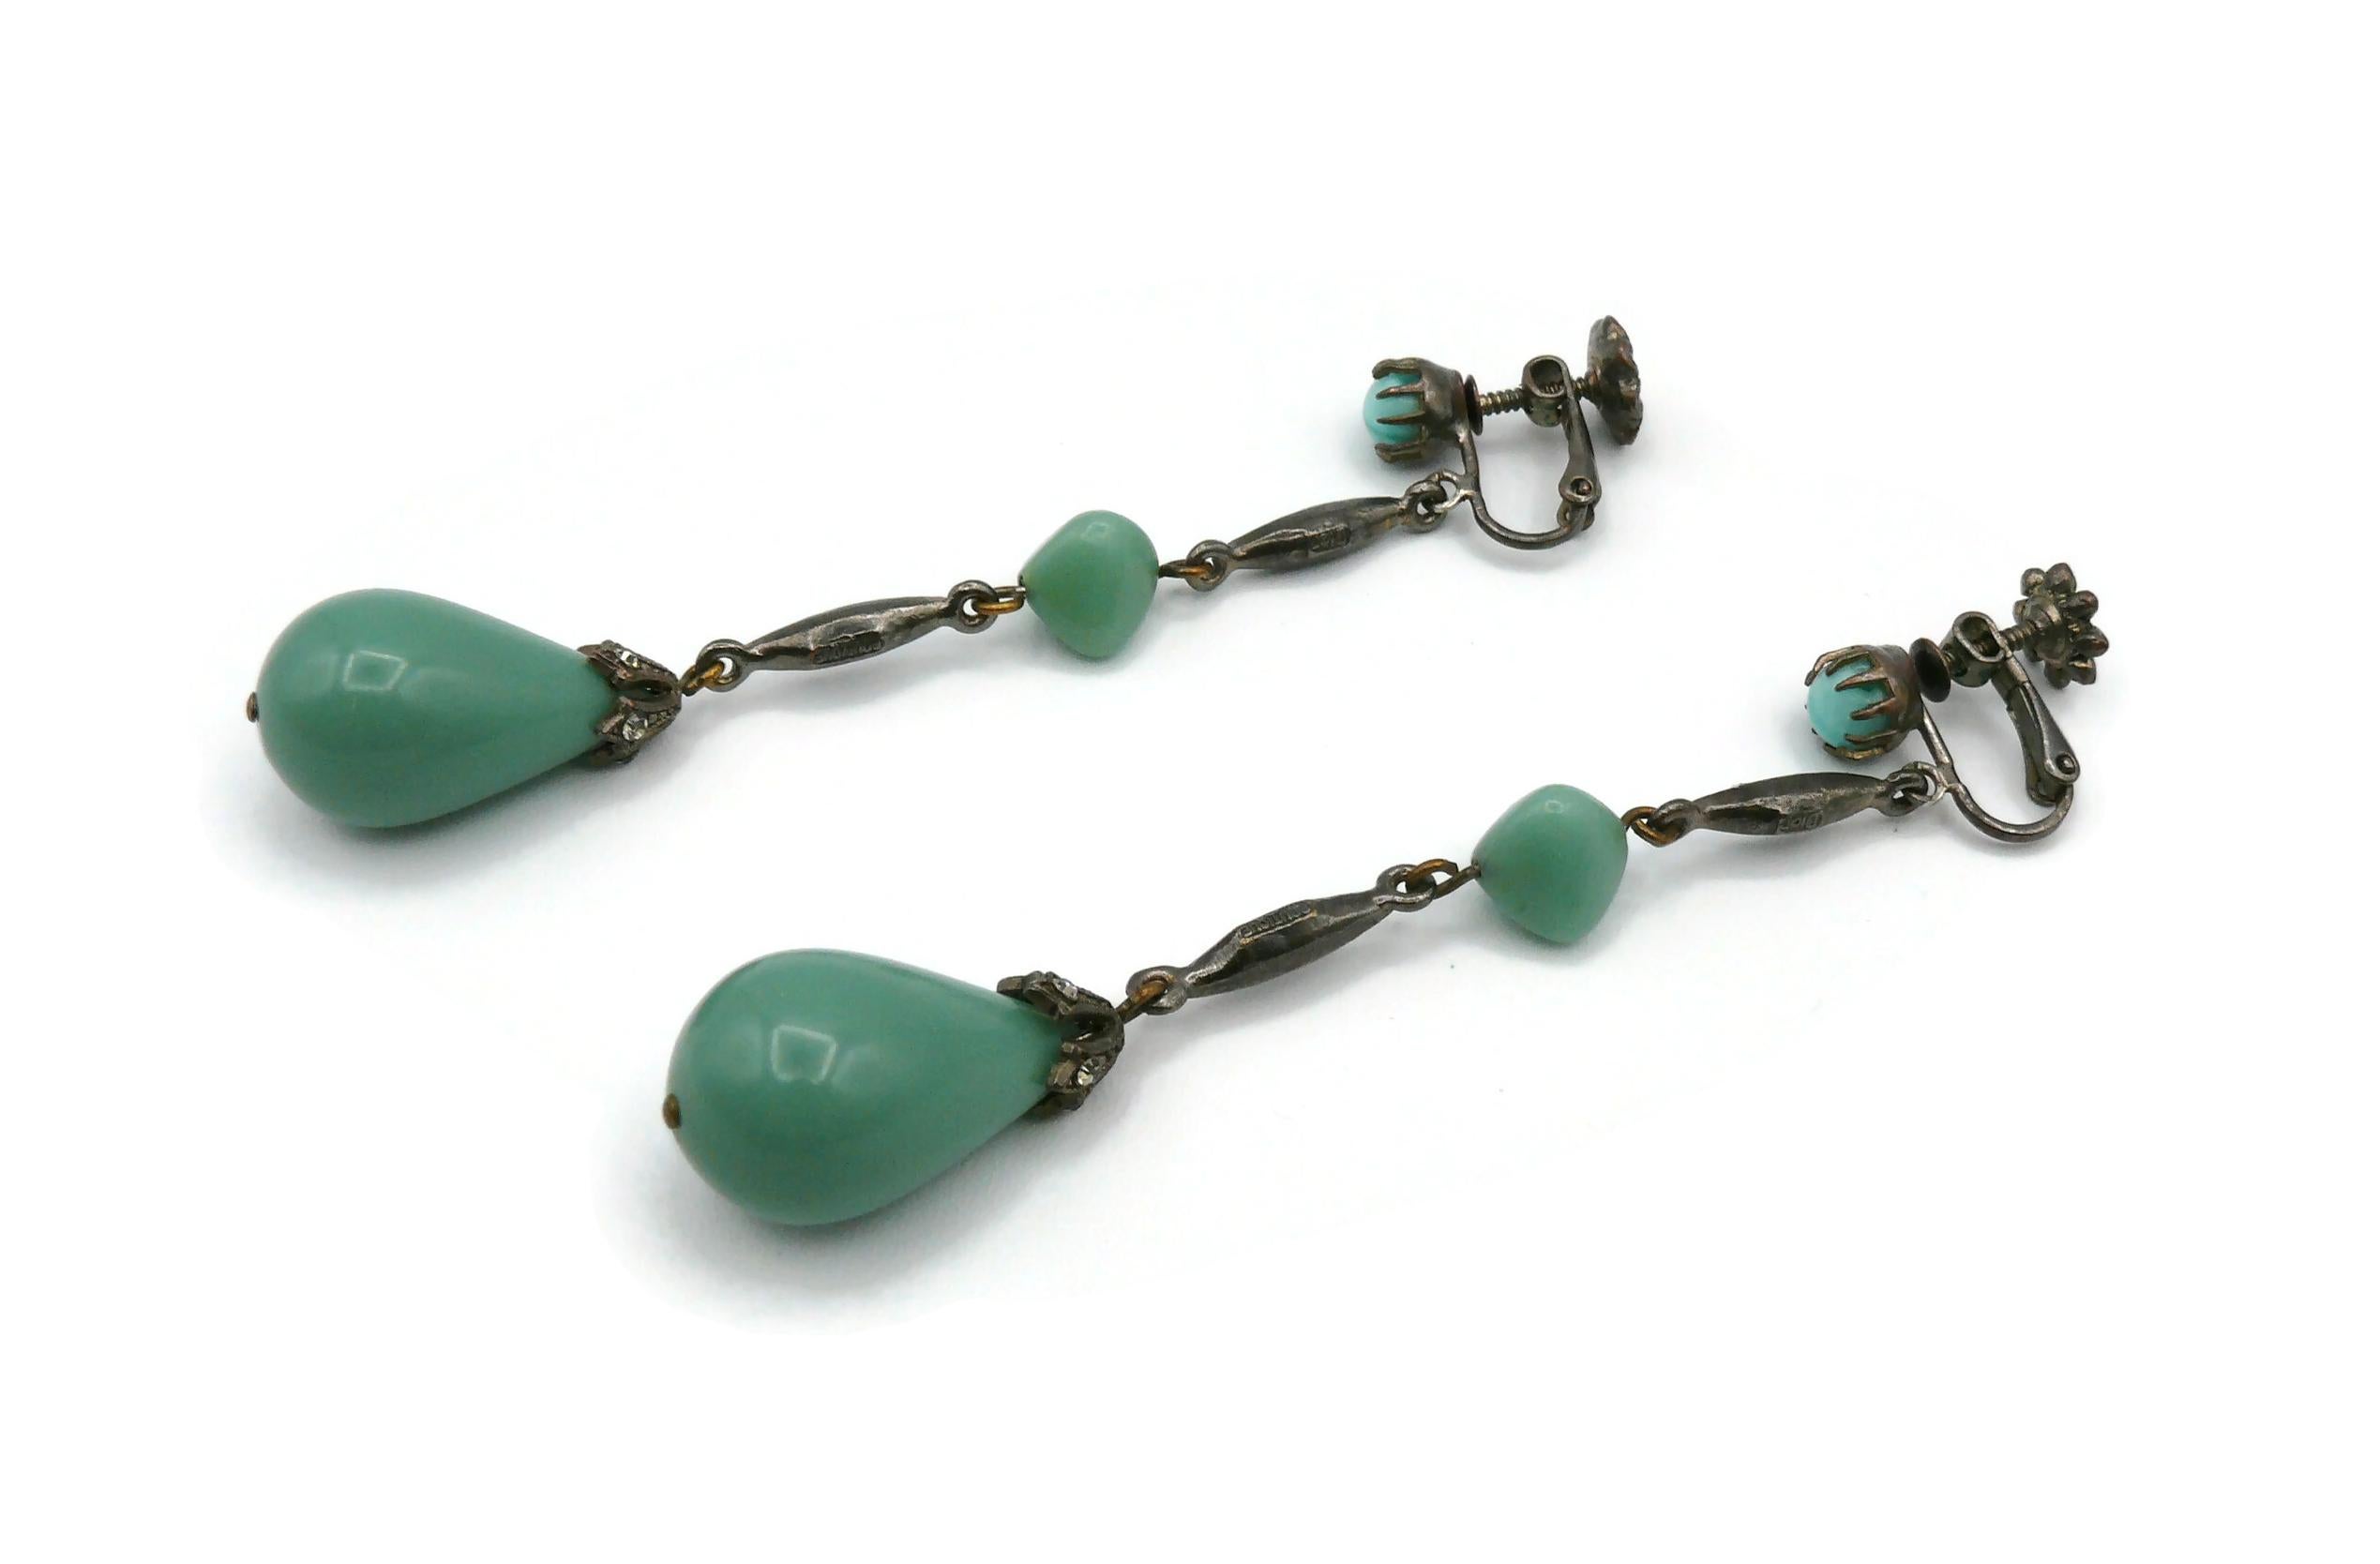 Christian Dior Boutique Vintage Victorian Insipred Faux Jade Dangling Earrings For Sale 4